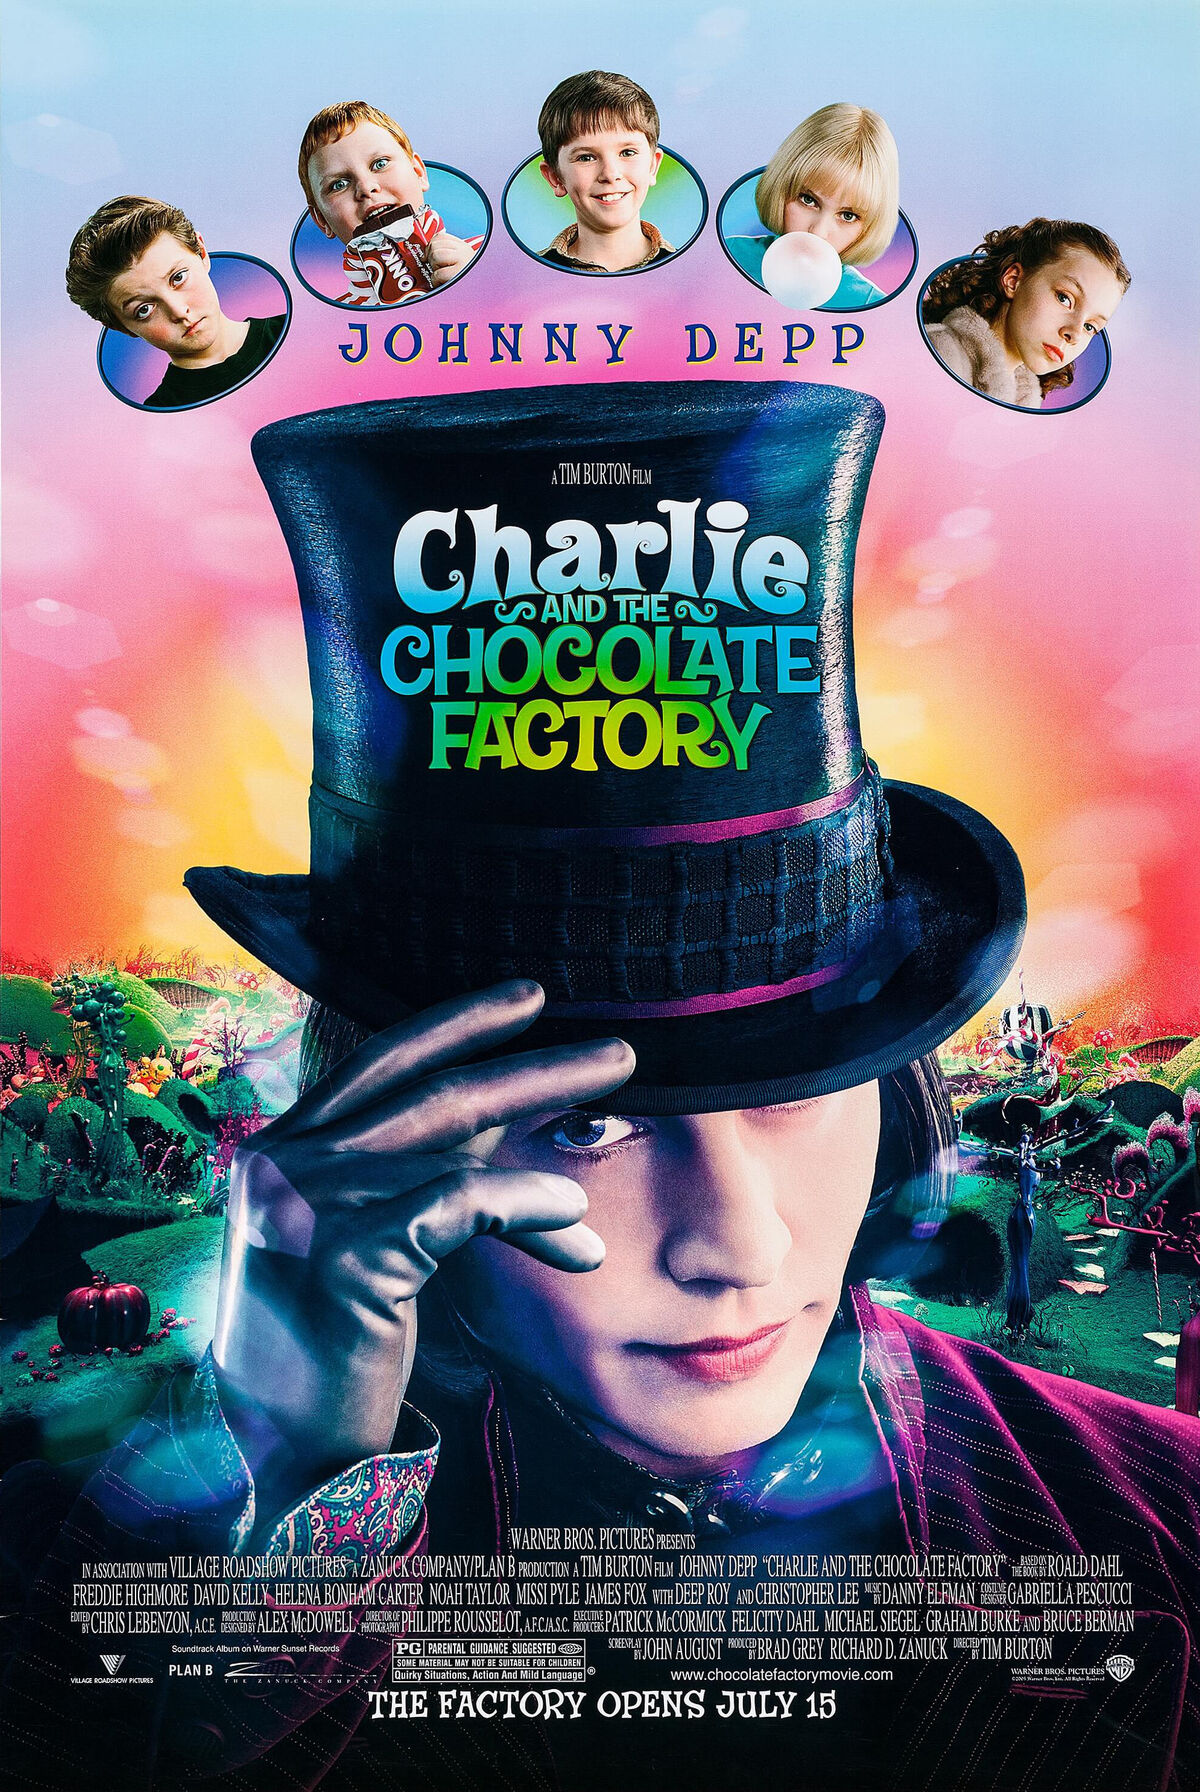 Charlie and the Chocolate Factory (film) | Warner Bros